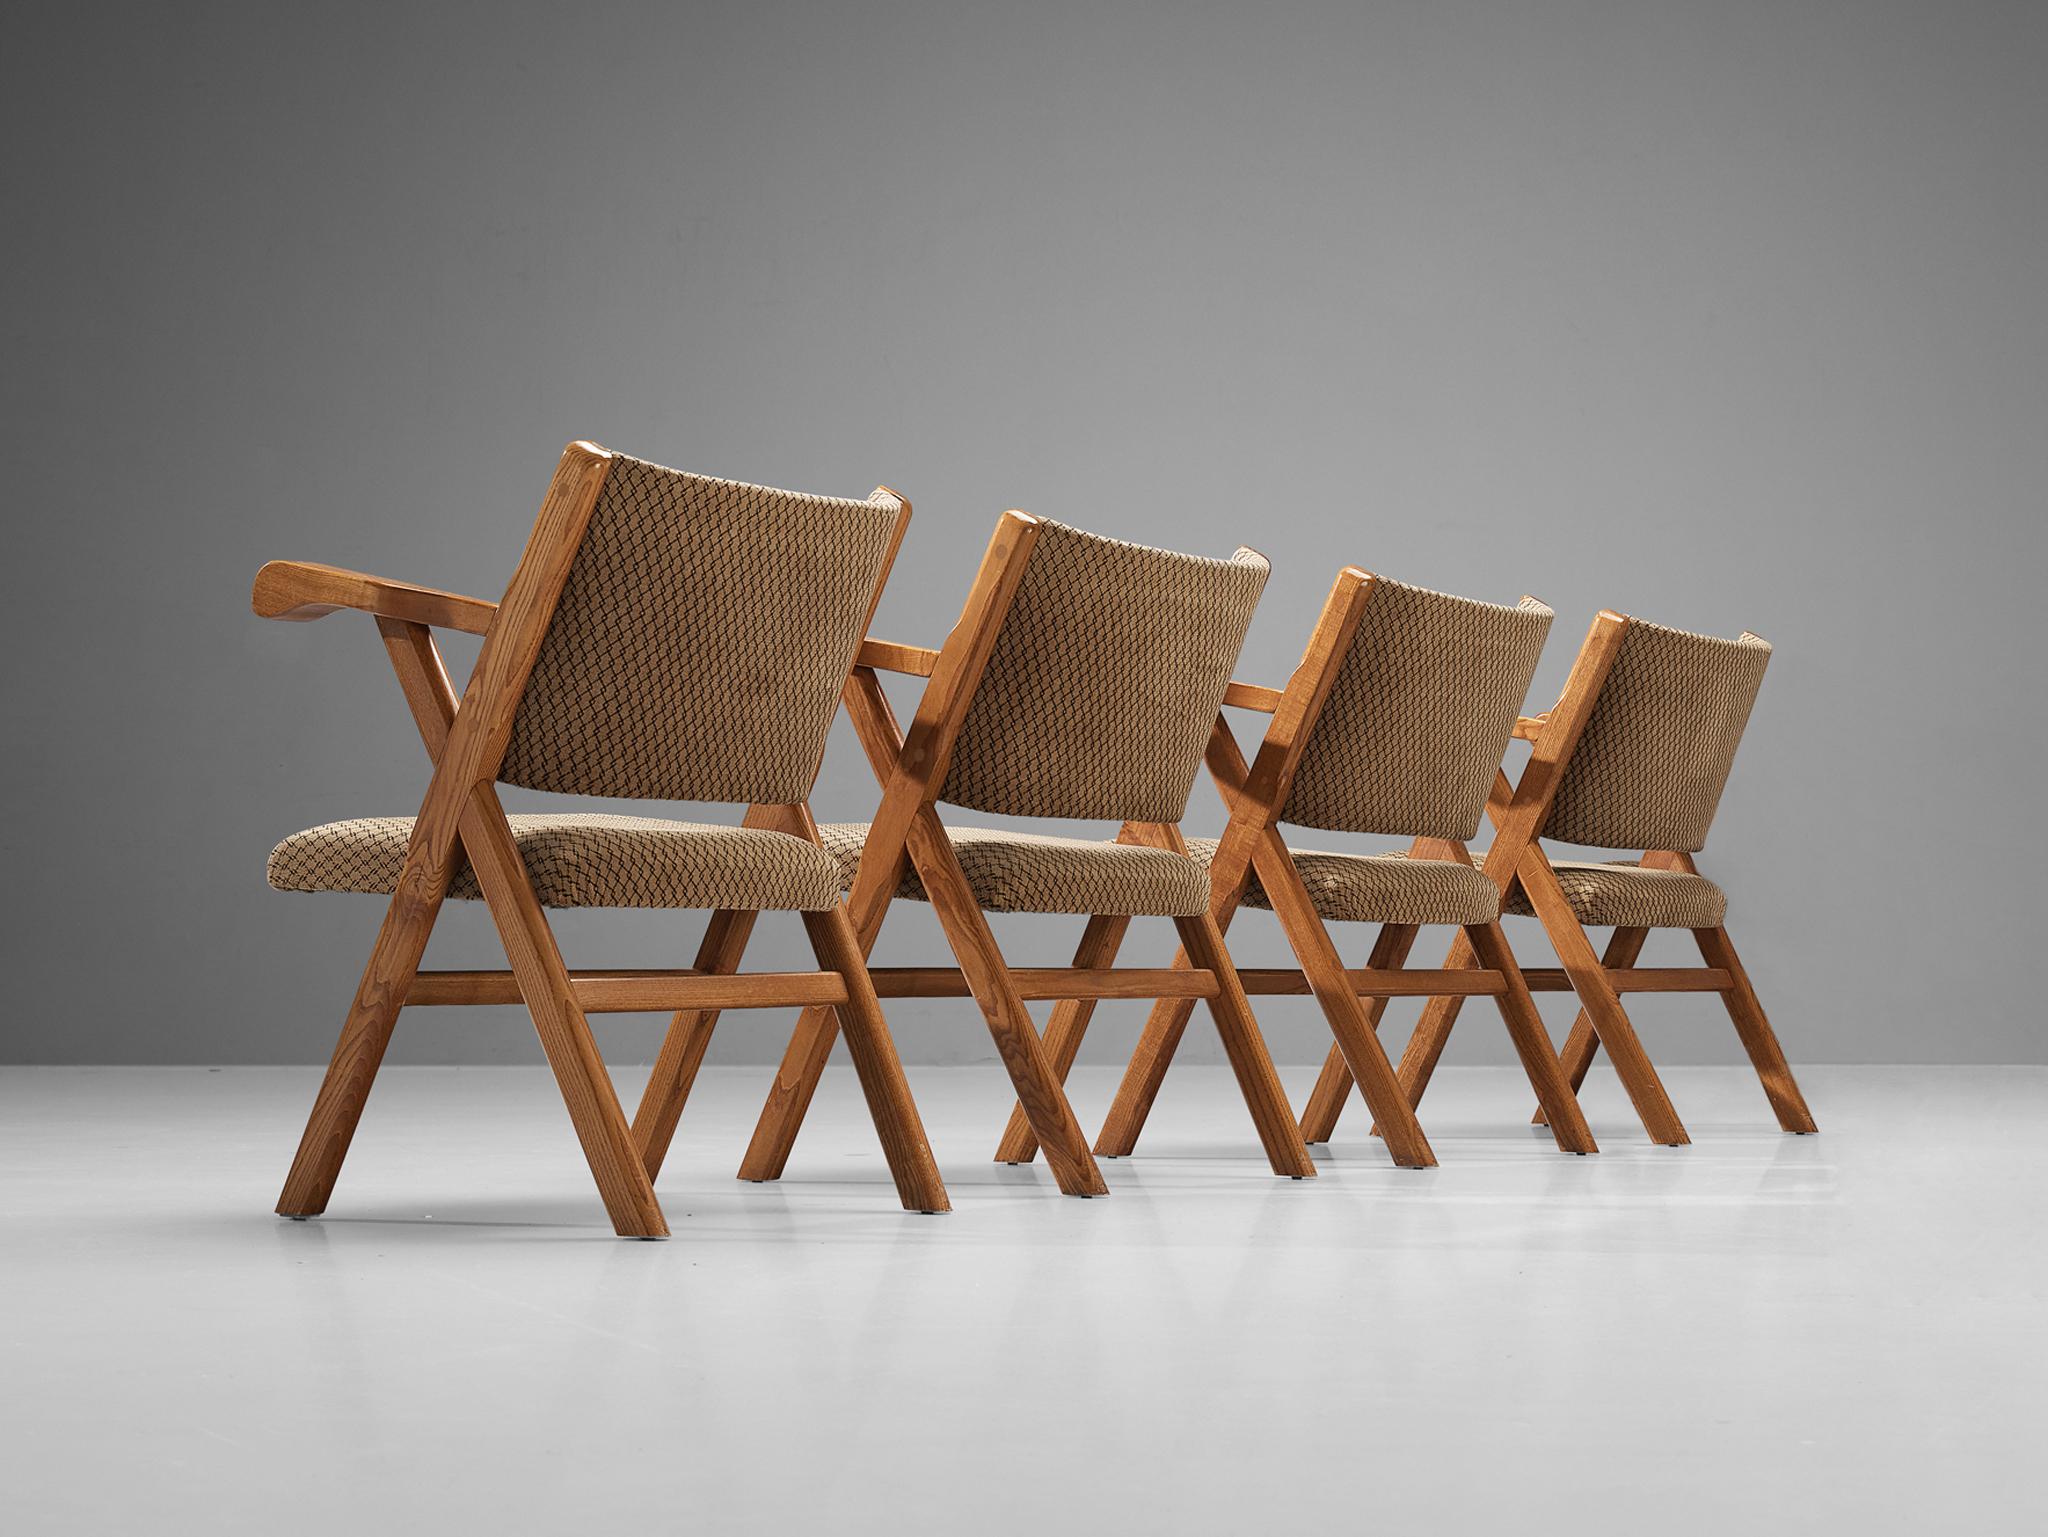 Armchairs, ash, fabric, Italy, 1960s. 

Sturdy Italian armchairs in solid ash and beige checkered pattern upholstery. The x-shaped design elevates the overall elegancy of this rustic chair. Moreover, the armrests of these armchairs show beautiful